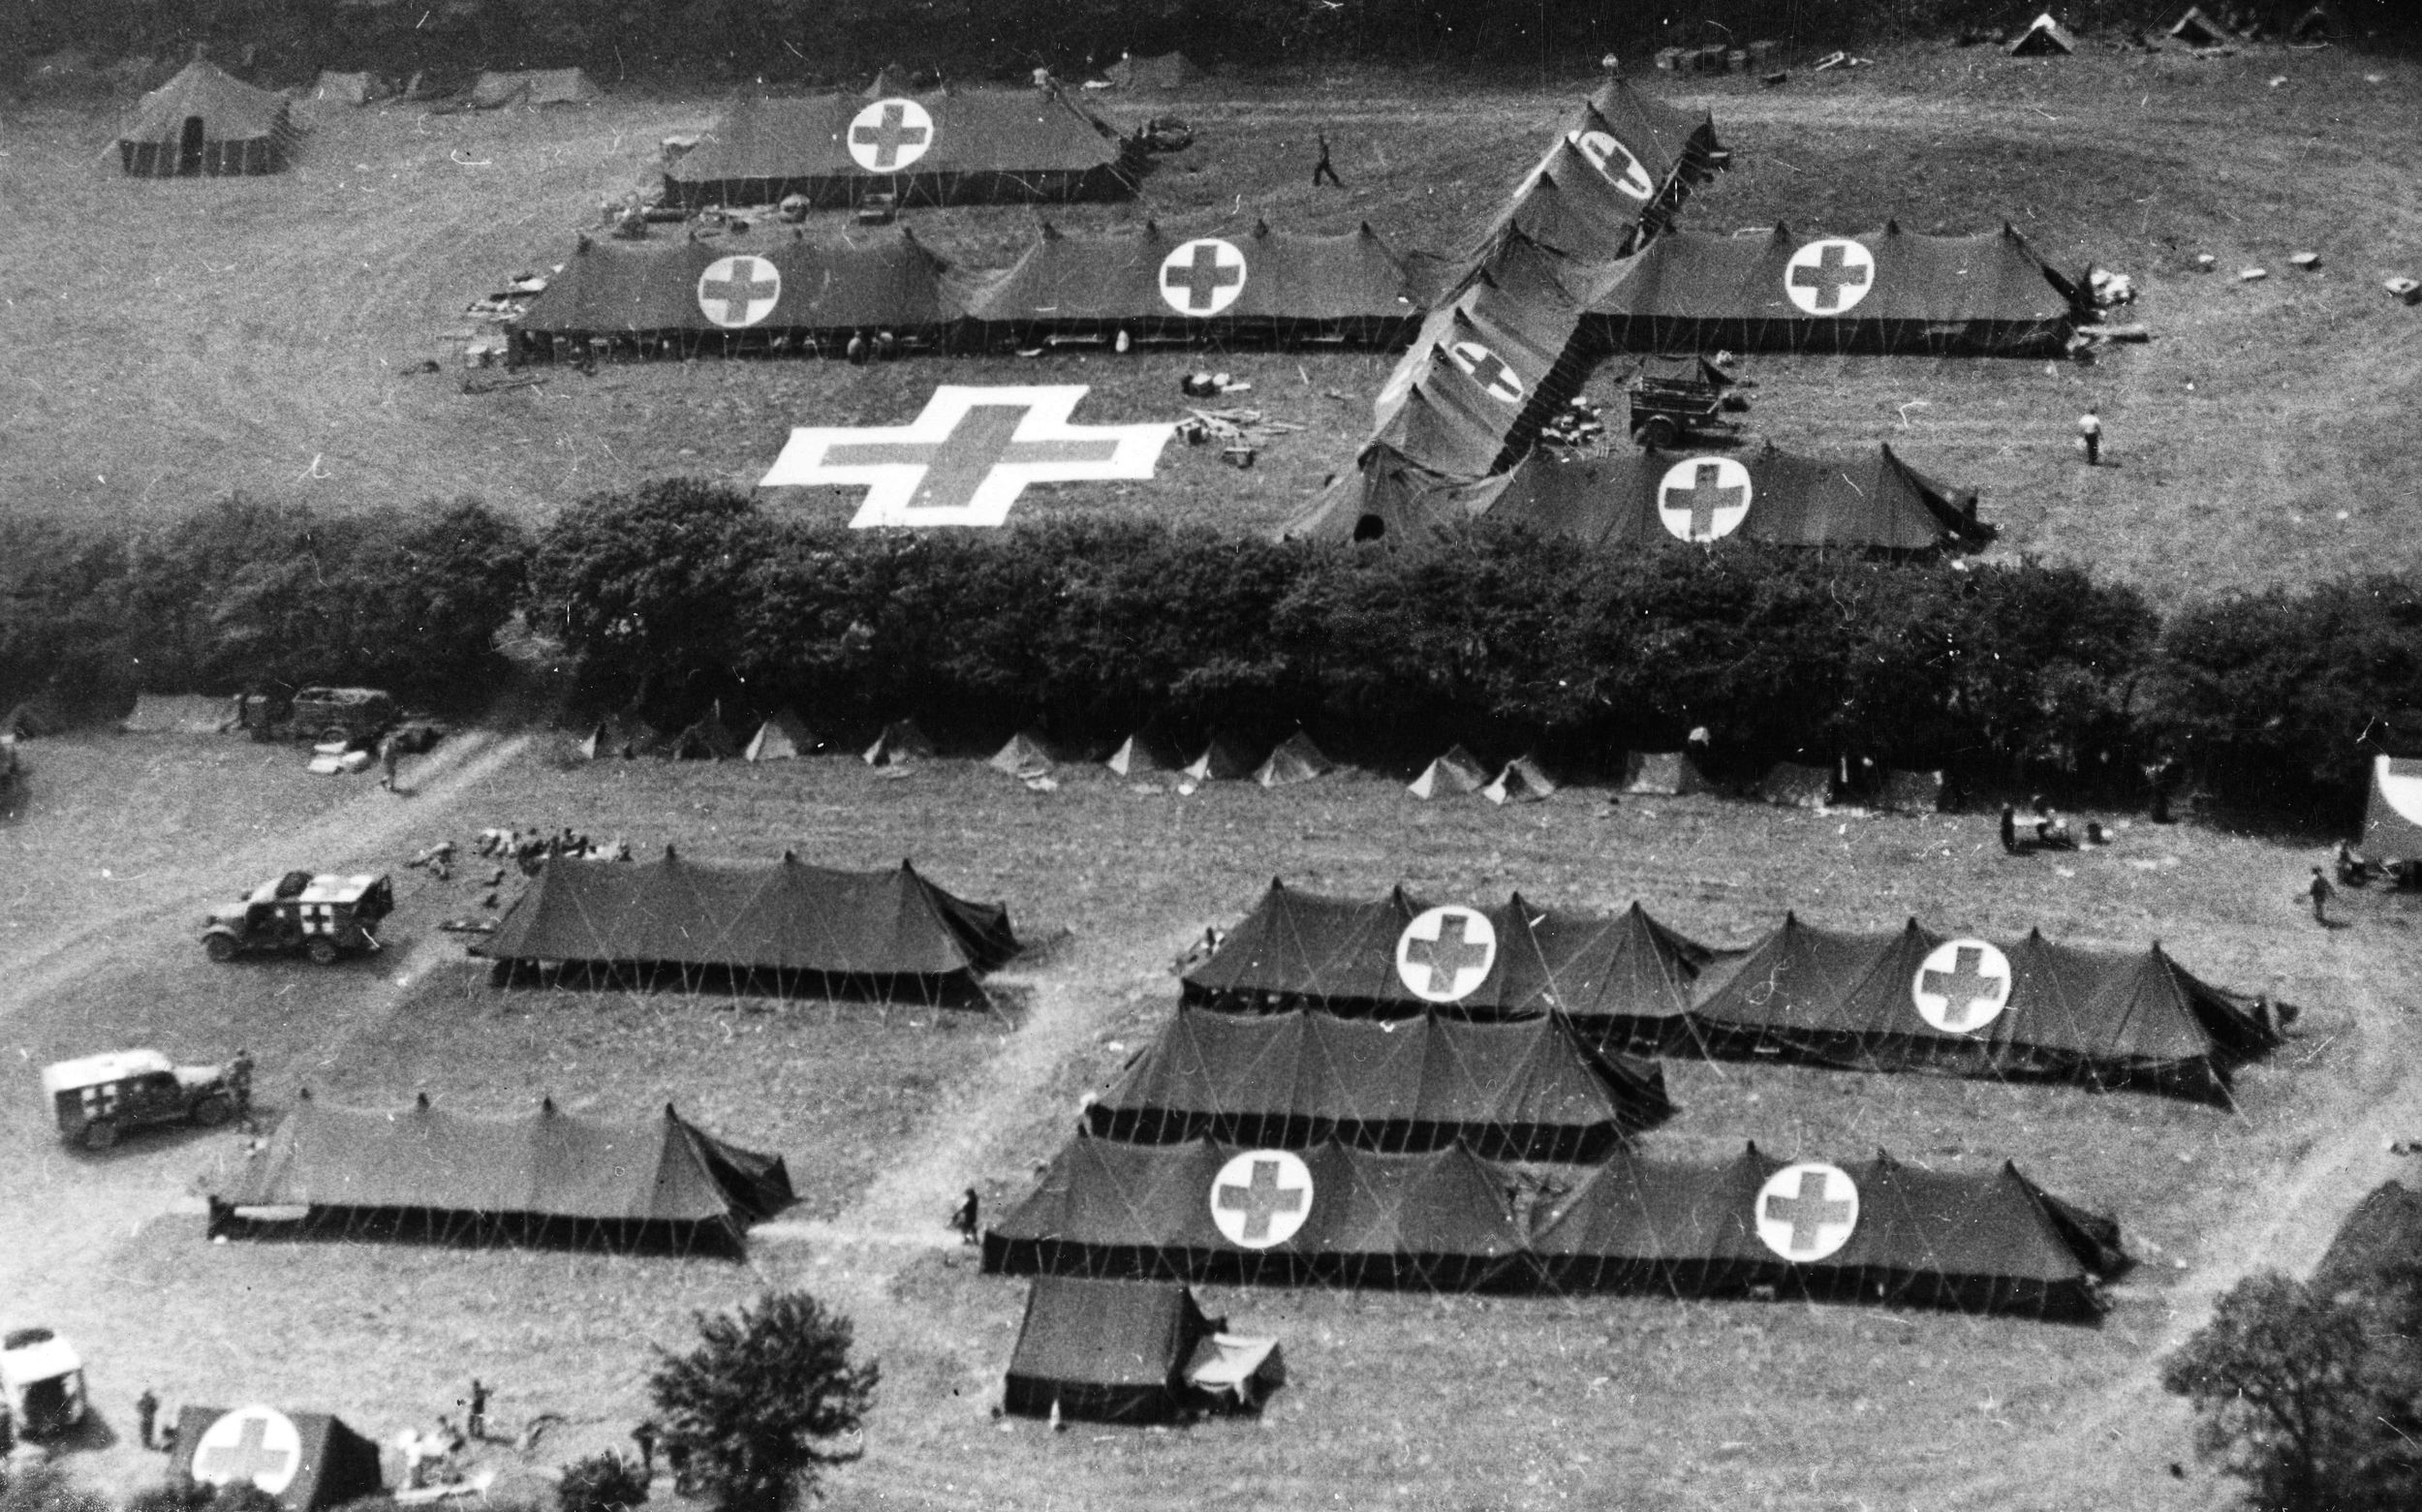 Clearly marked by large red crosses atop its tents, a U.S. Army field hospital has been erected on the Cherbourg Peninsula in France during the summer of 1944. The distinctive markings were placed for easy visual recognition from the air. 